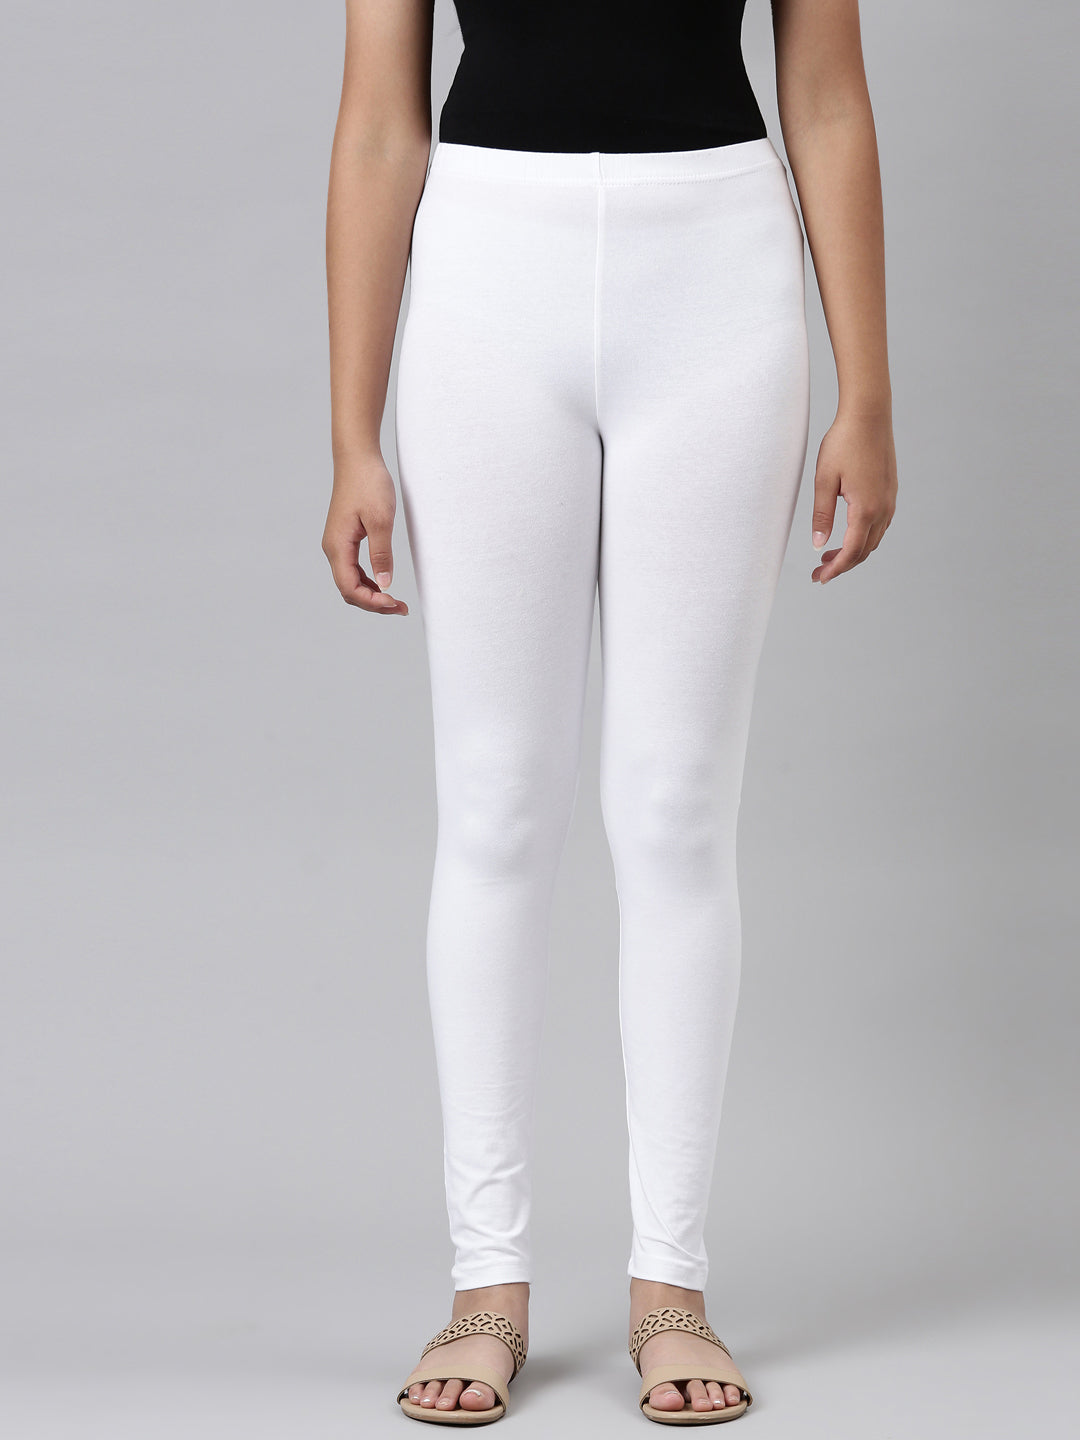 Buy White Fusion Fit Mens Cotton Trouser Online At Best Prices  Tistabene